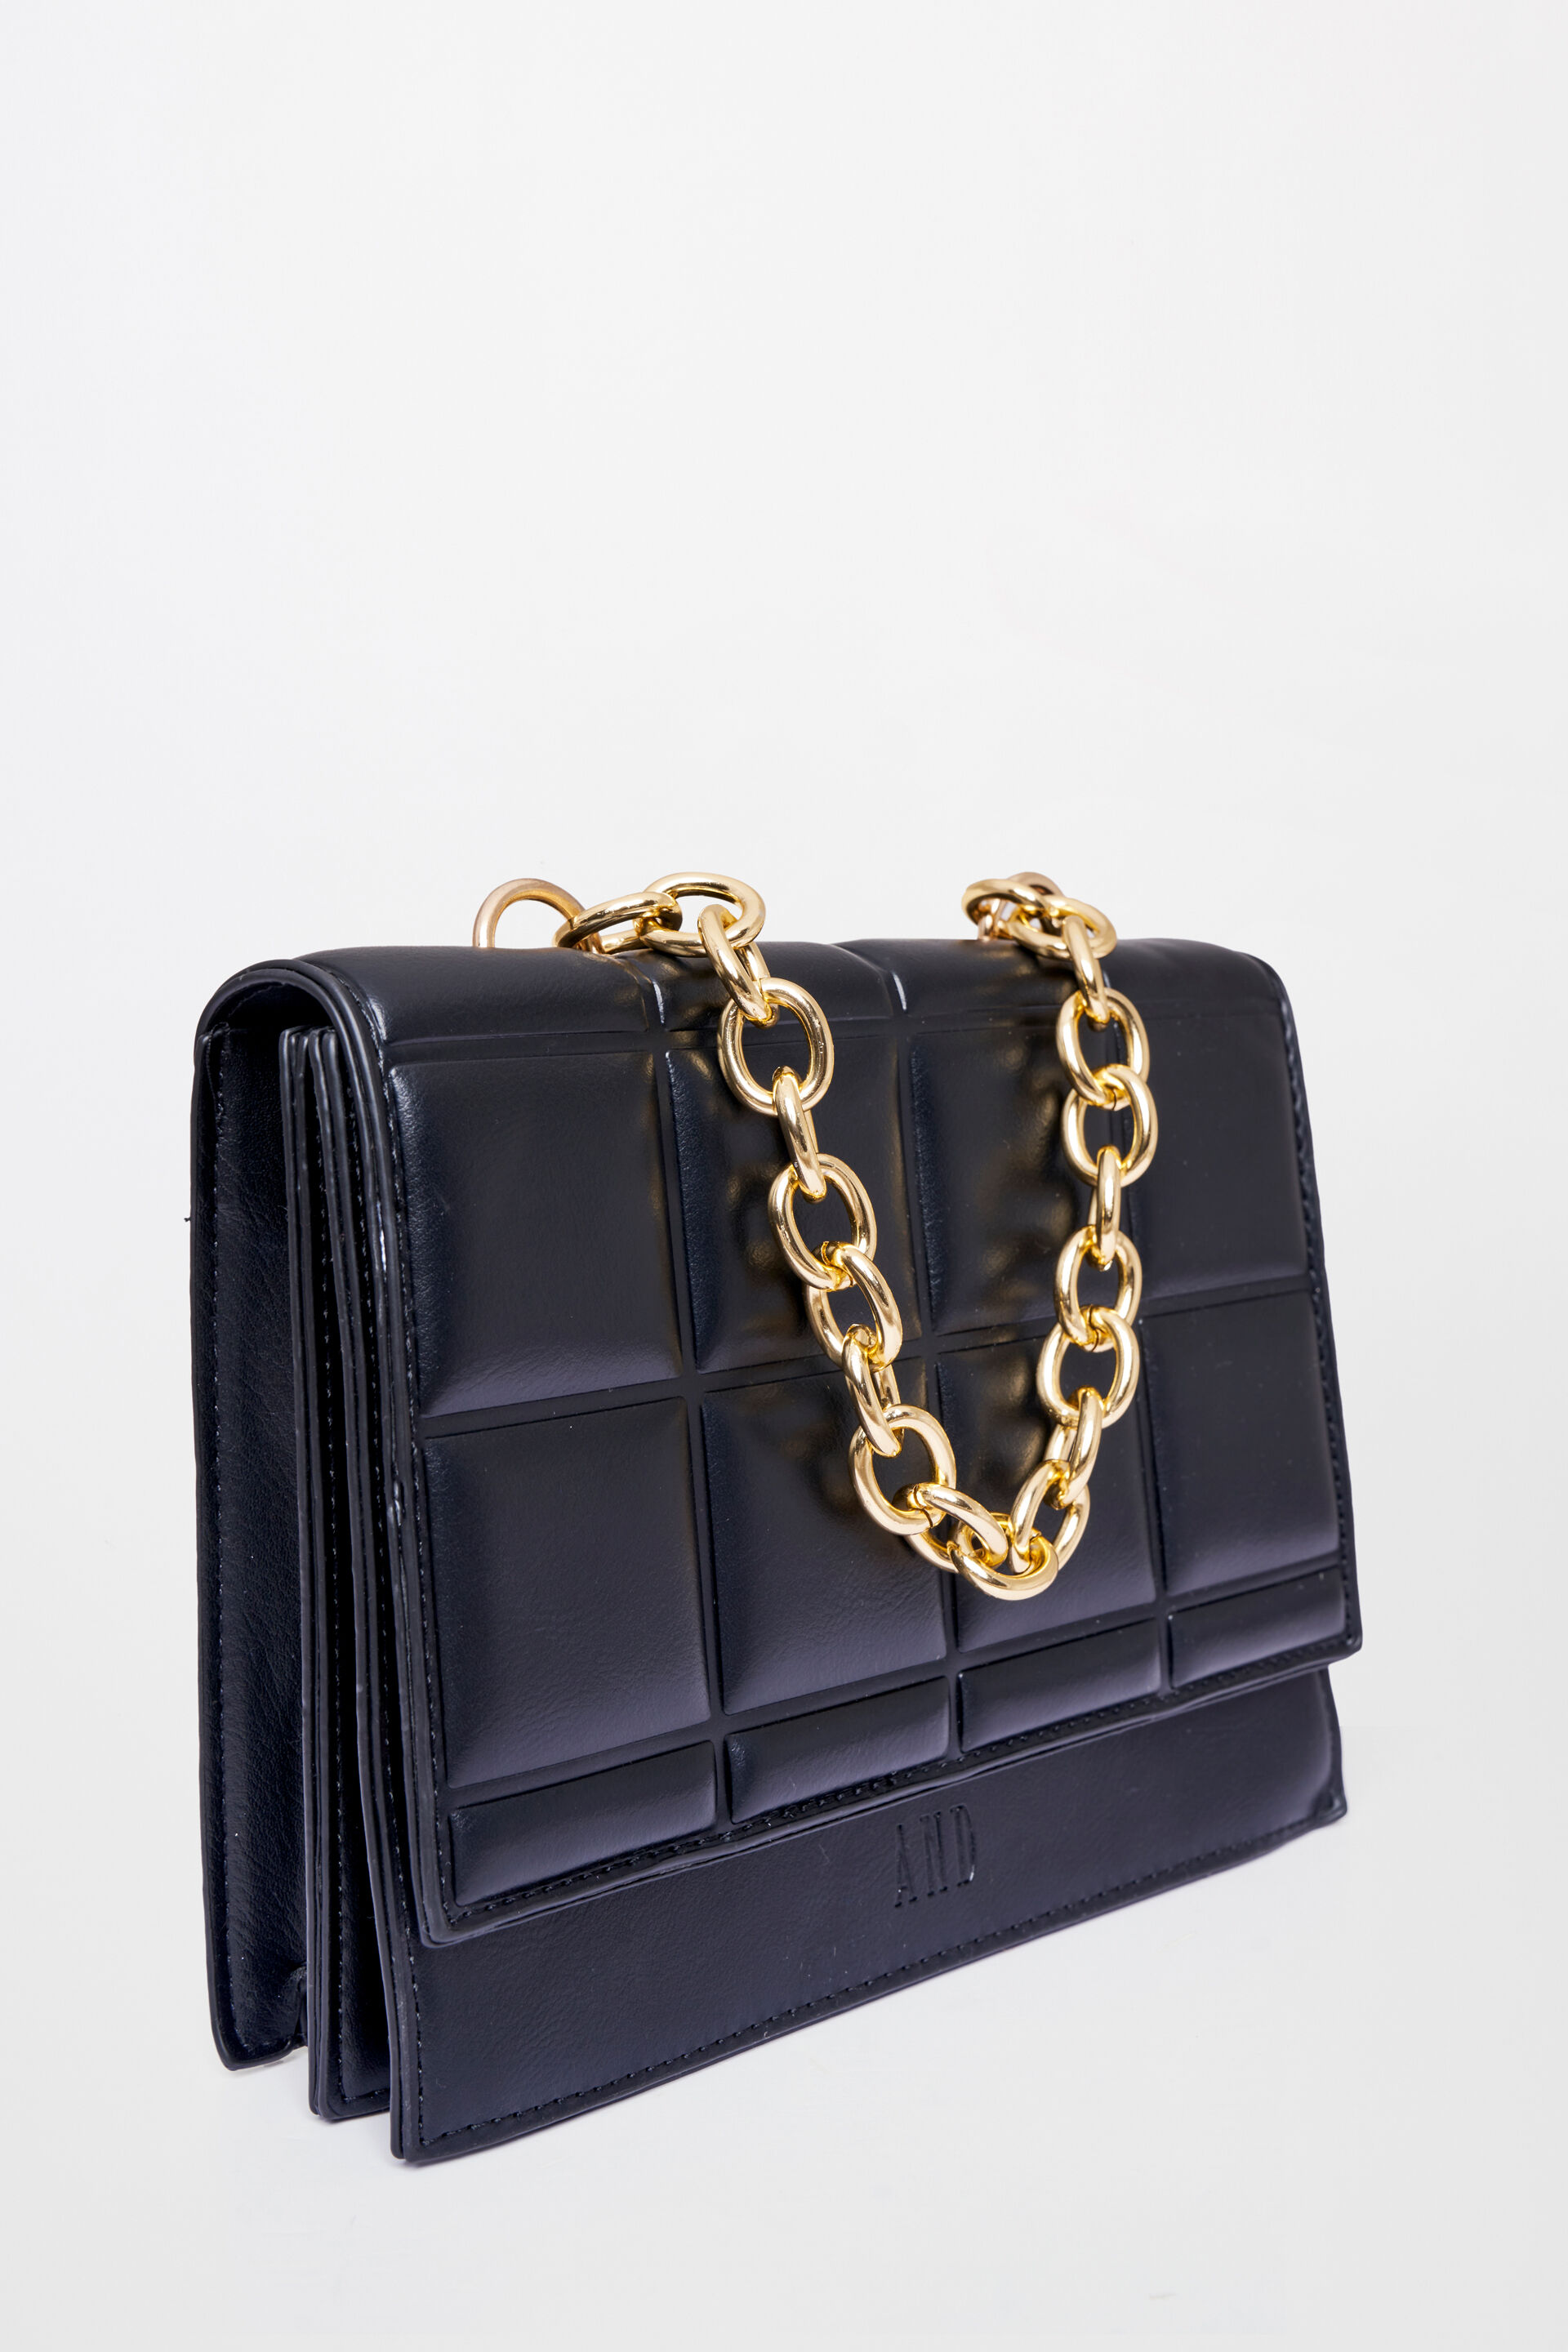 Slingbags | Ladies Purse With Chain | Freeup